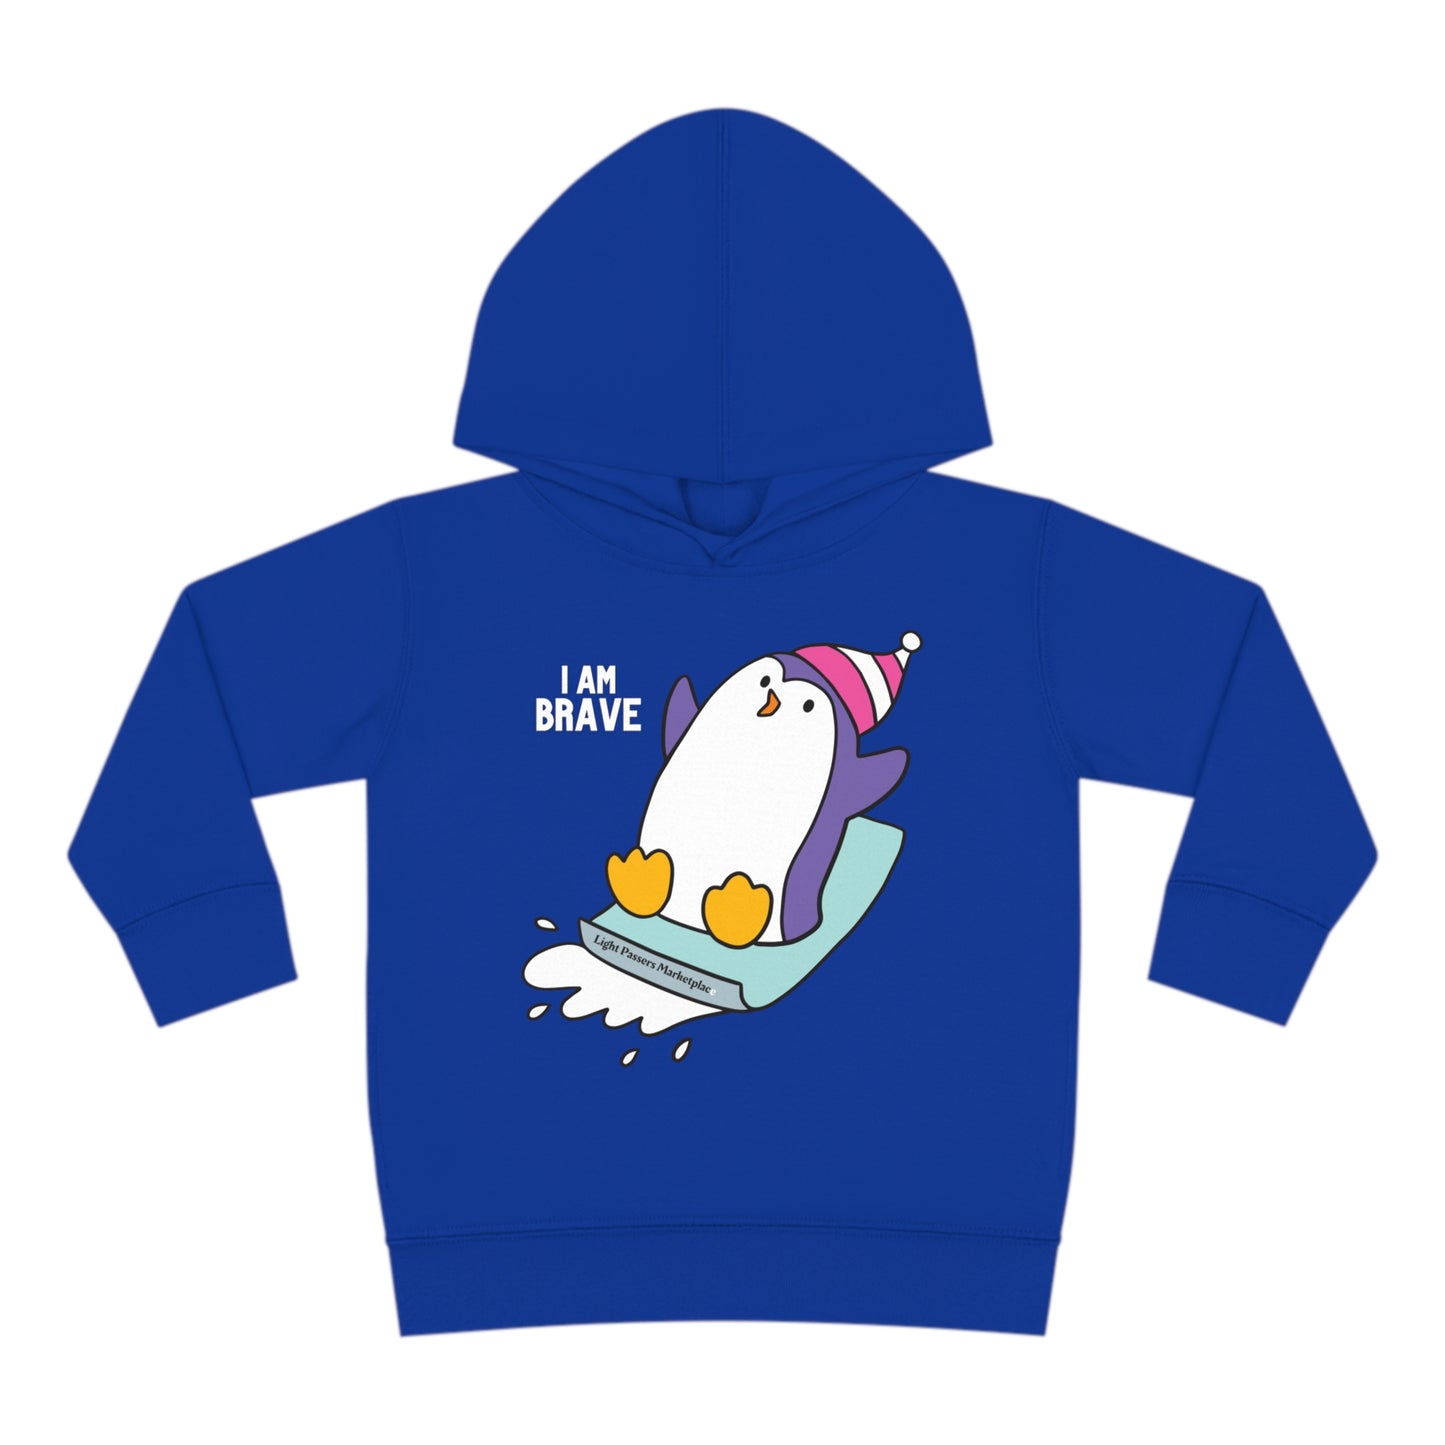 A Rabbit Skins toddler hoodie featuring a Brave Penguin design, with jersey-lined hood, cover-stitched details, side seam pockets, and durable cotton-polyester blend for cozy comfort.